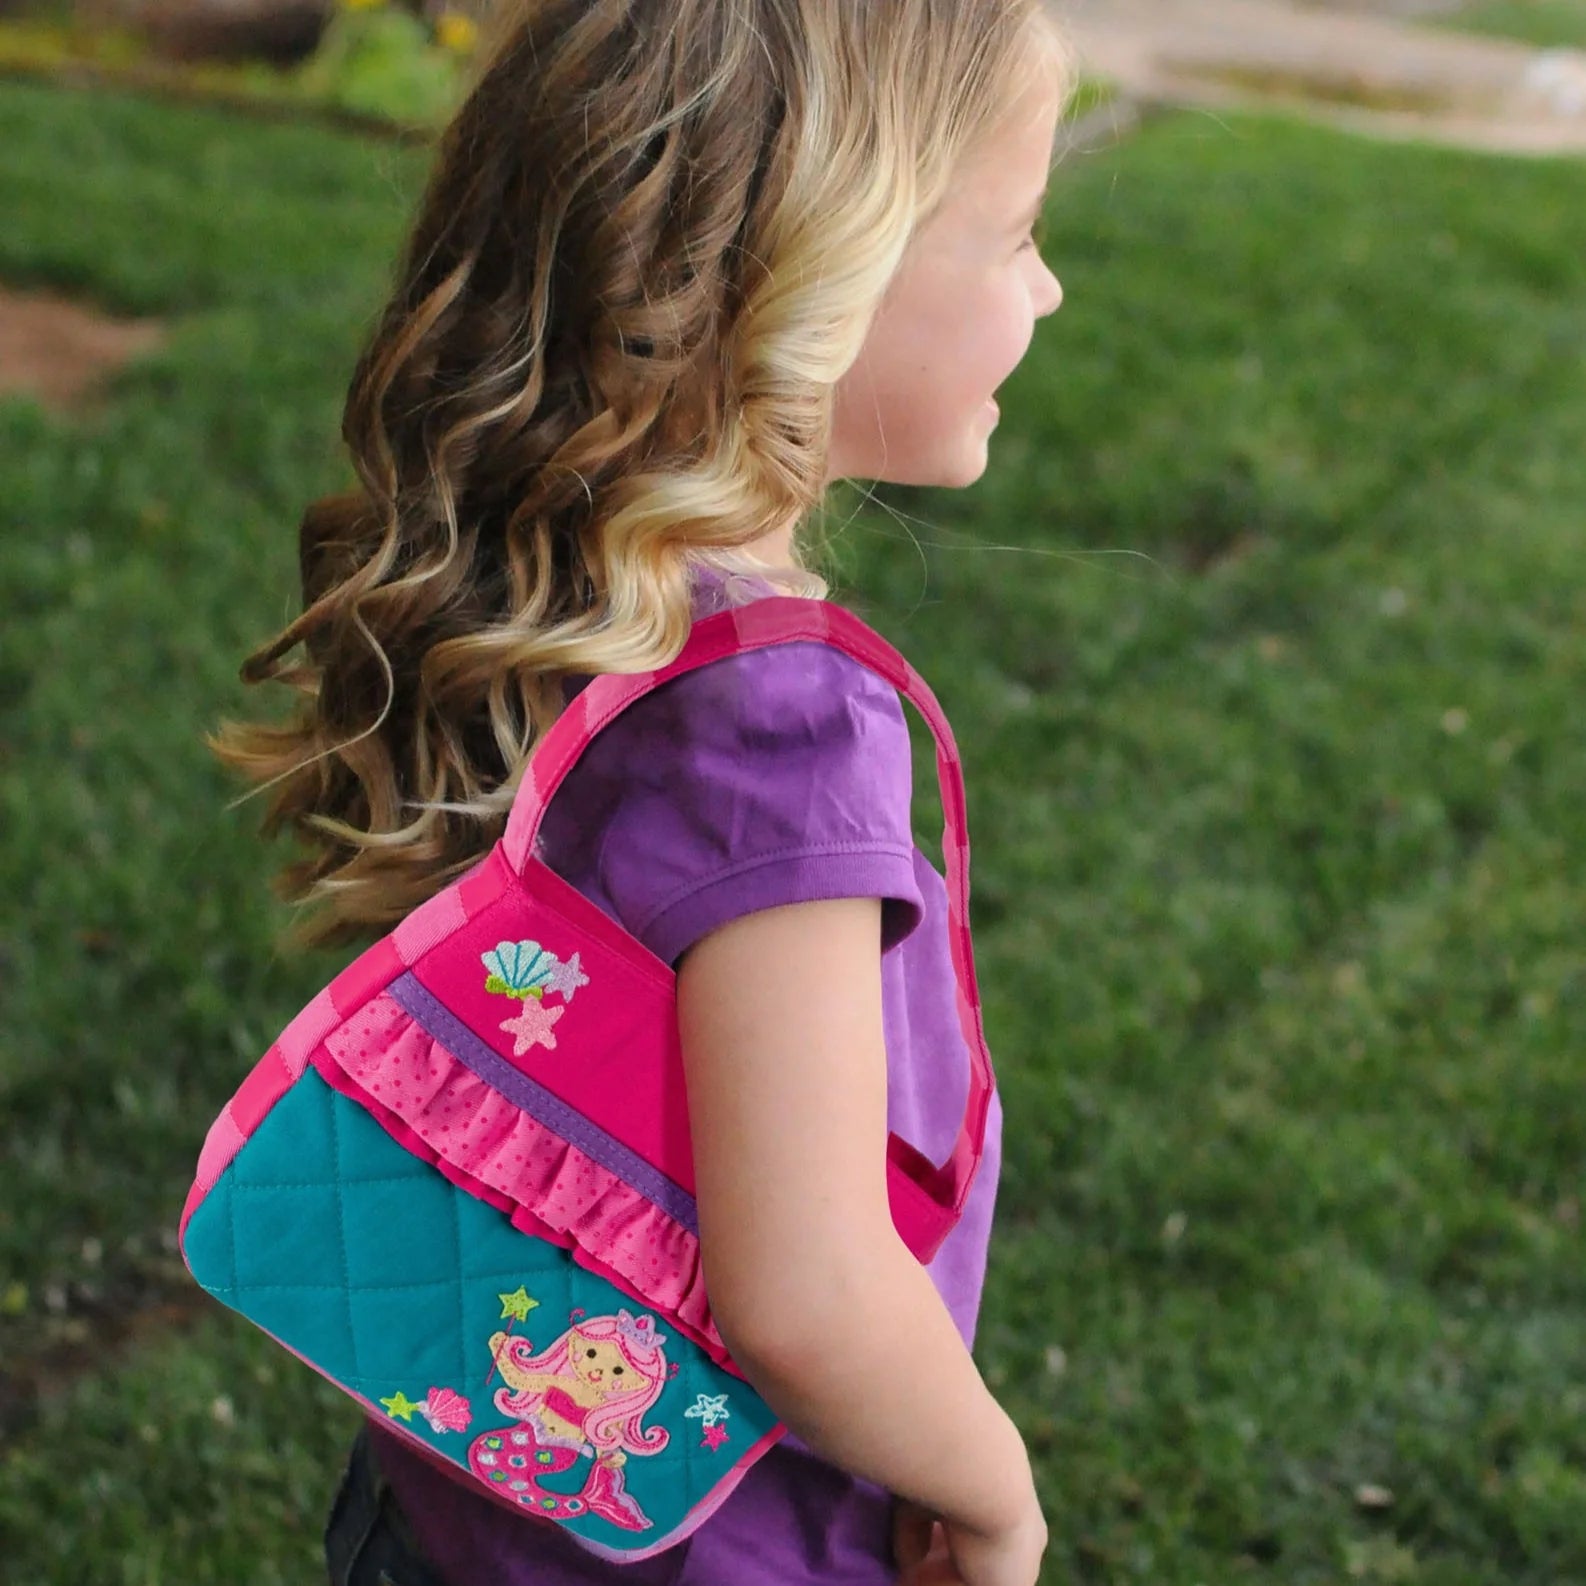 Mermaid Quilted Purse  - Doodlebug's Children's Boutique